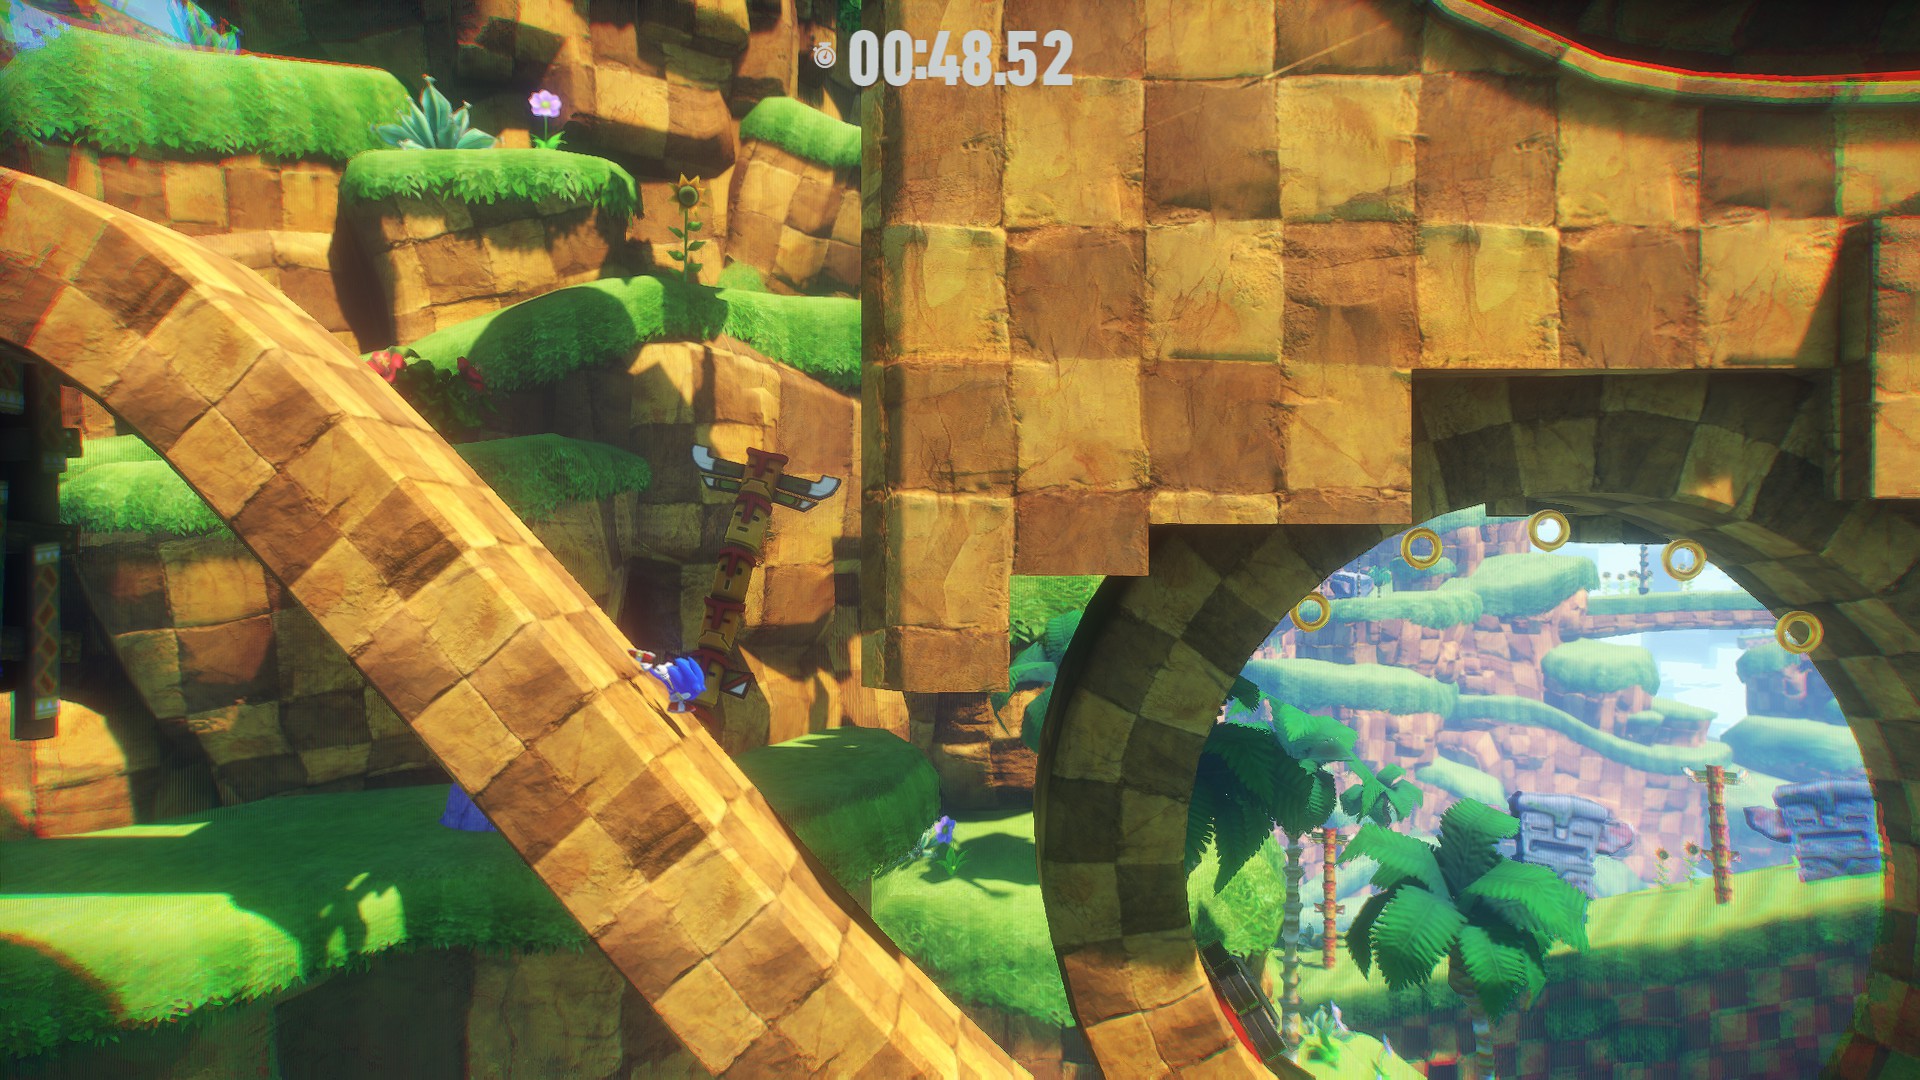 Sonic Frontiers review - new open zone direction still constrained